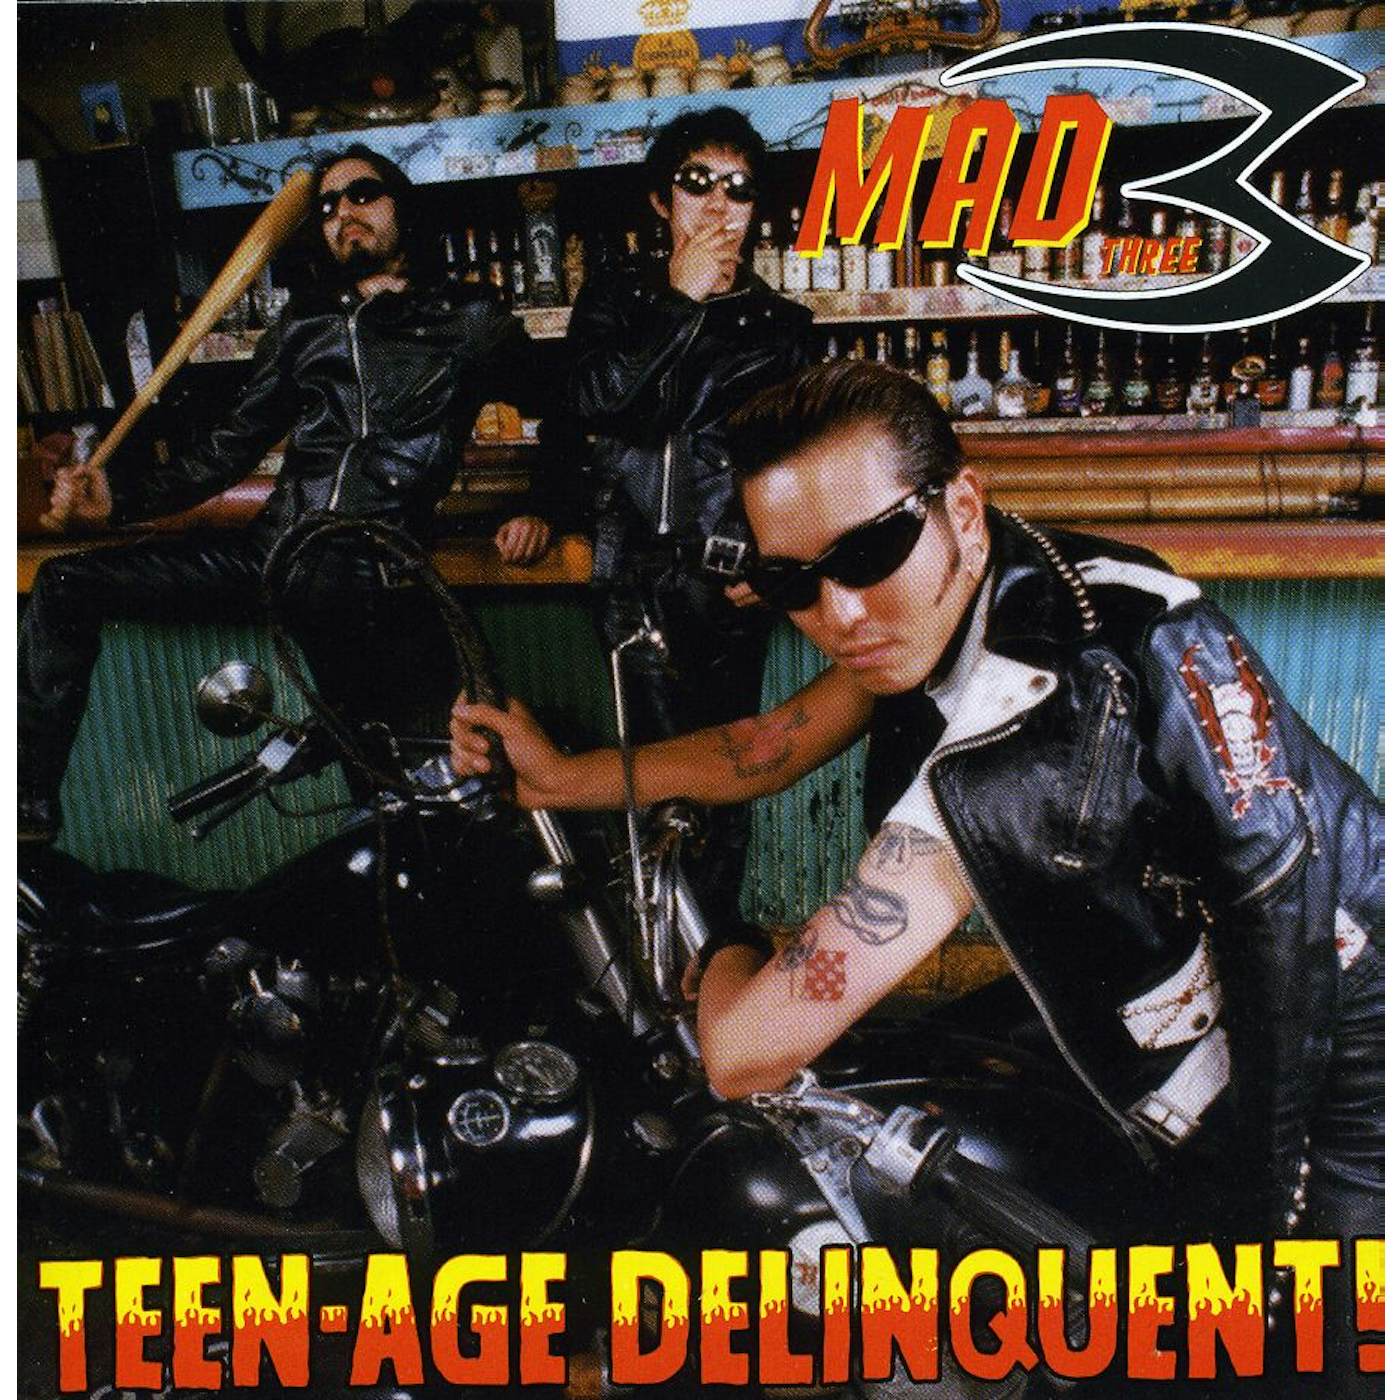 Mad 3 TEENAGE DELINQUENT CD